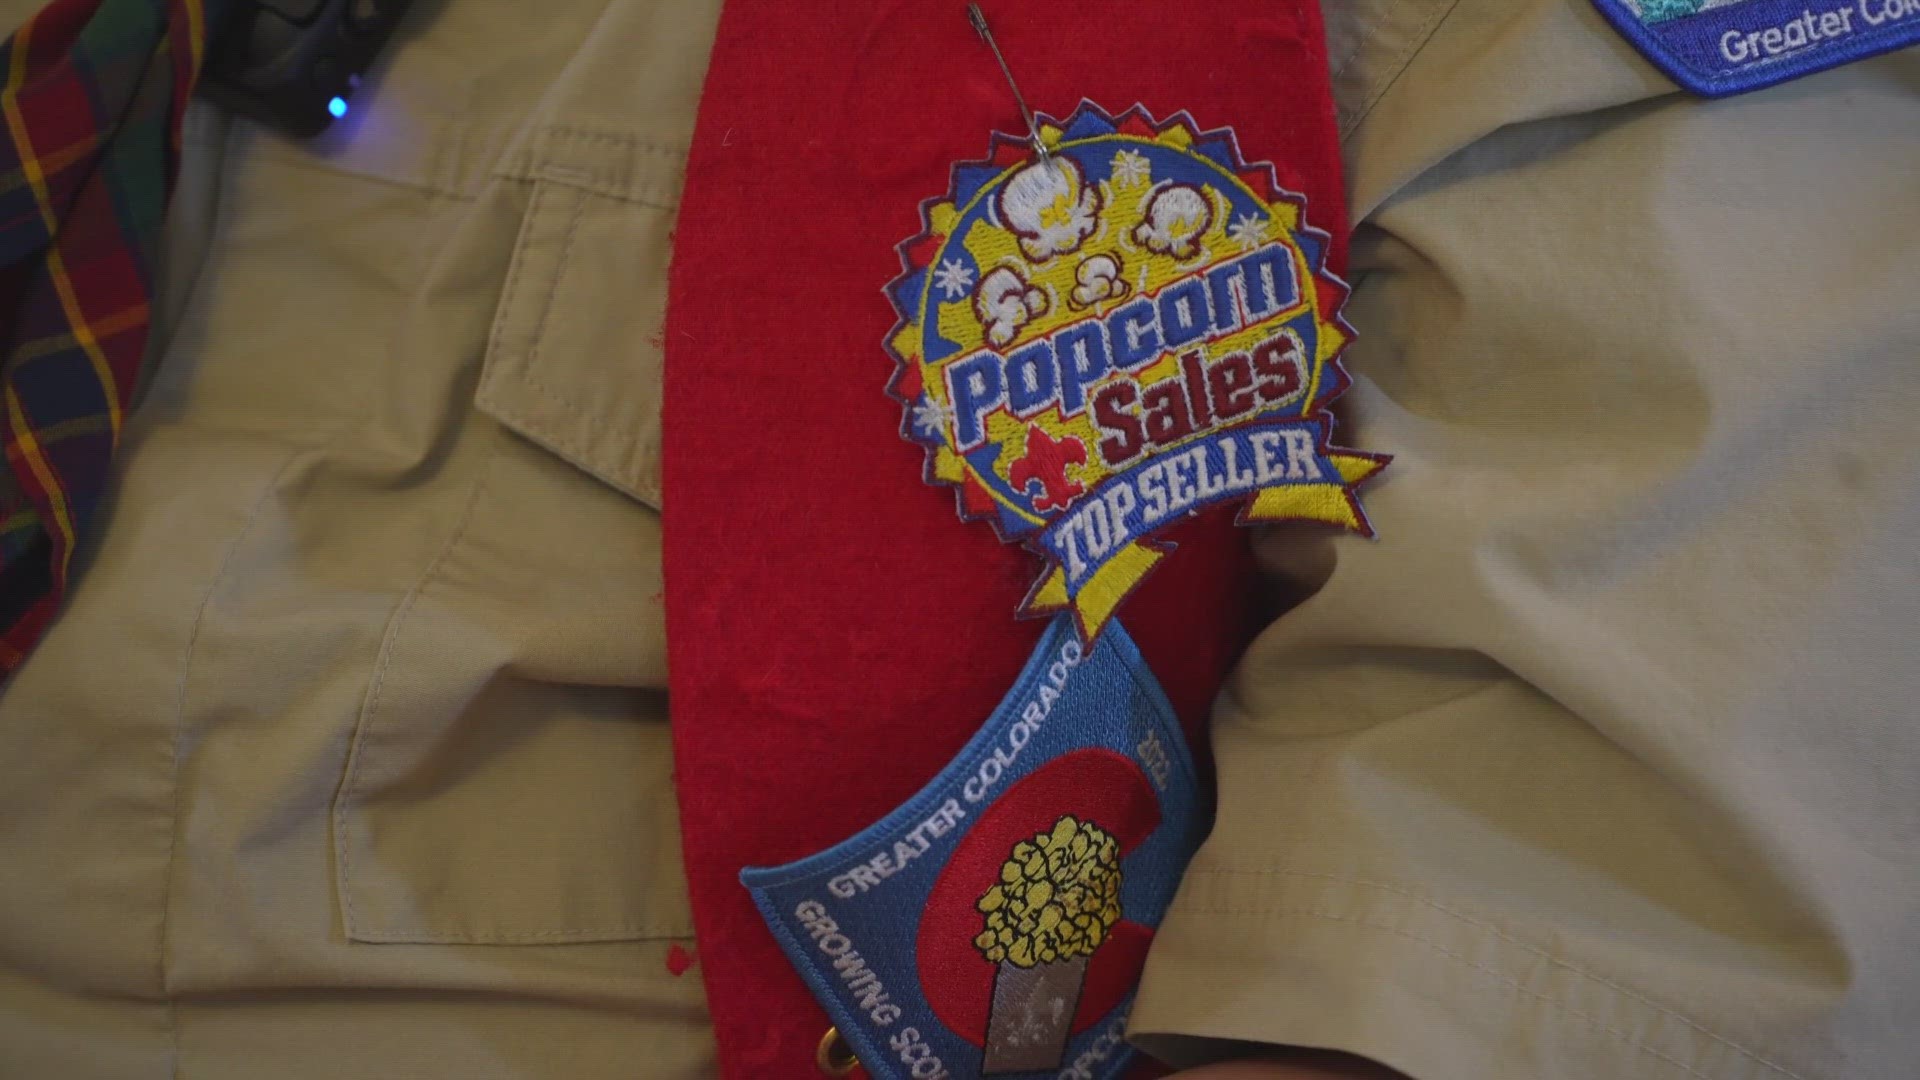 A Cub Scout from the Western Slope town of Rifle is one of the states biggest popcorn sellers, beating older Boy Scouts form the Denver and the Front Range area.